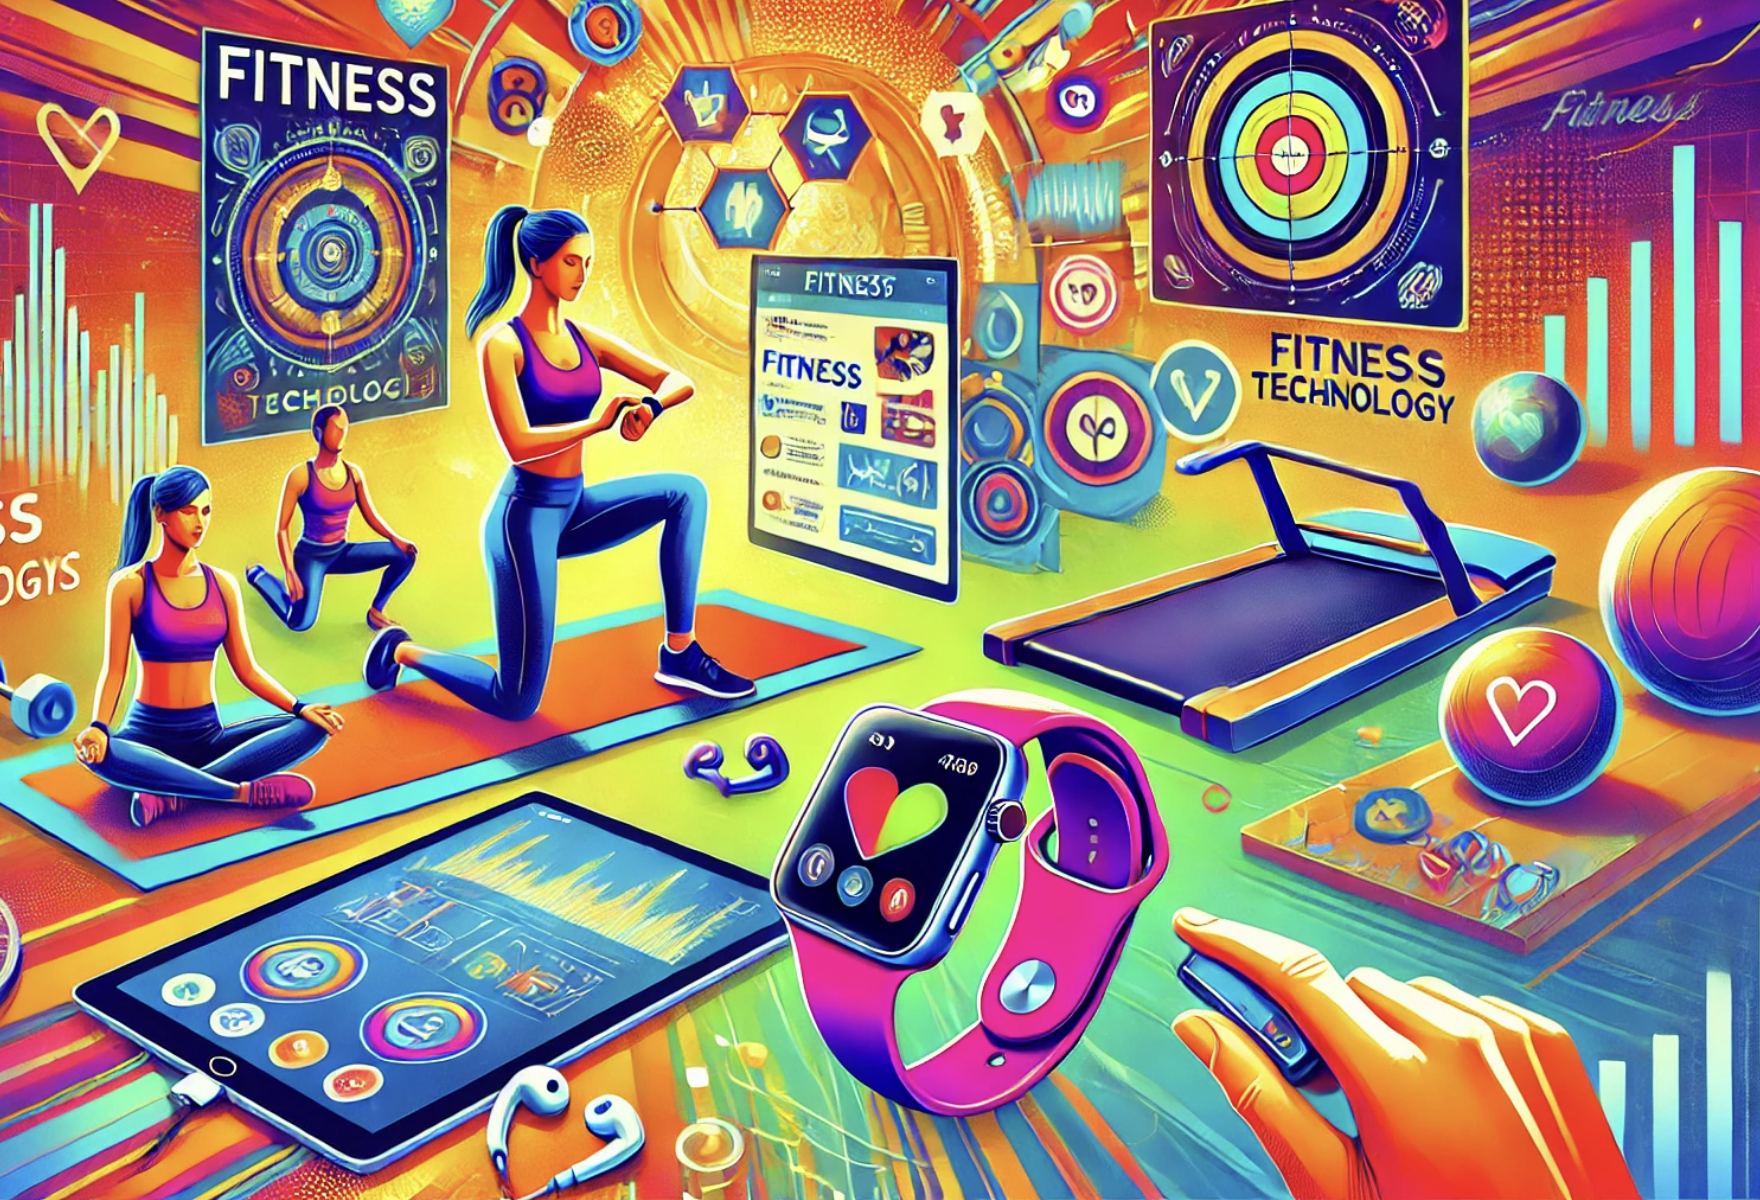 How to Use Technology to Enhance Your Fitness Journey?